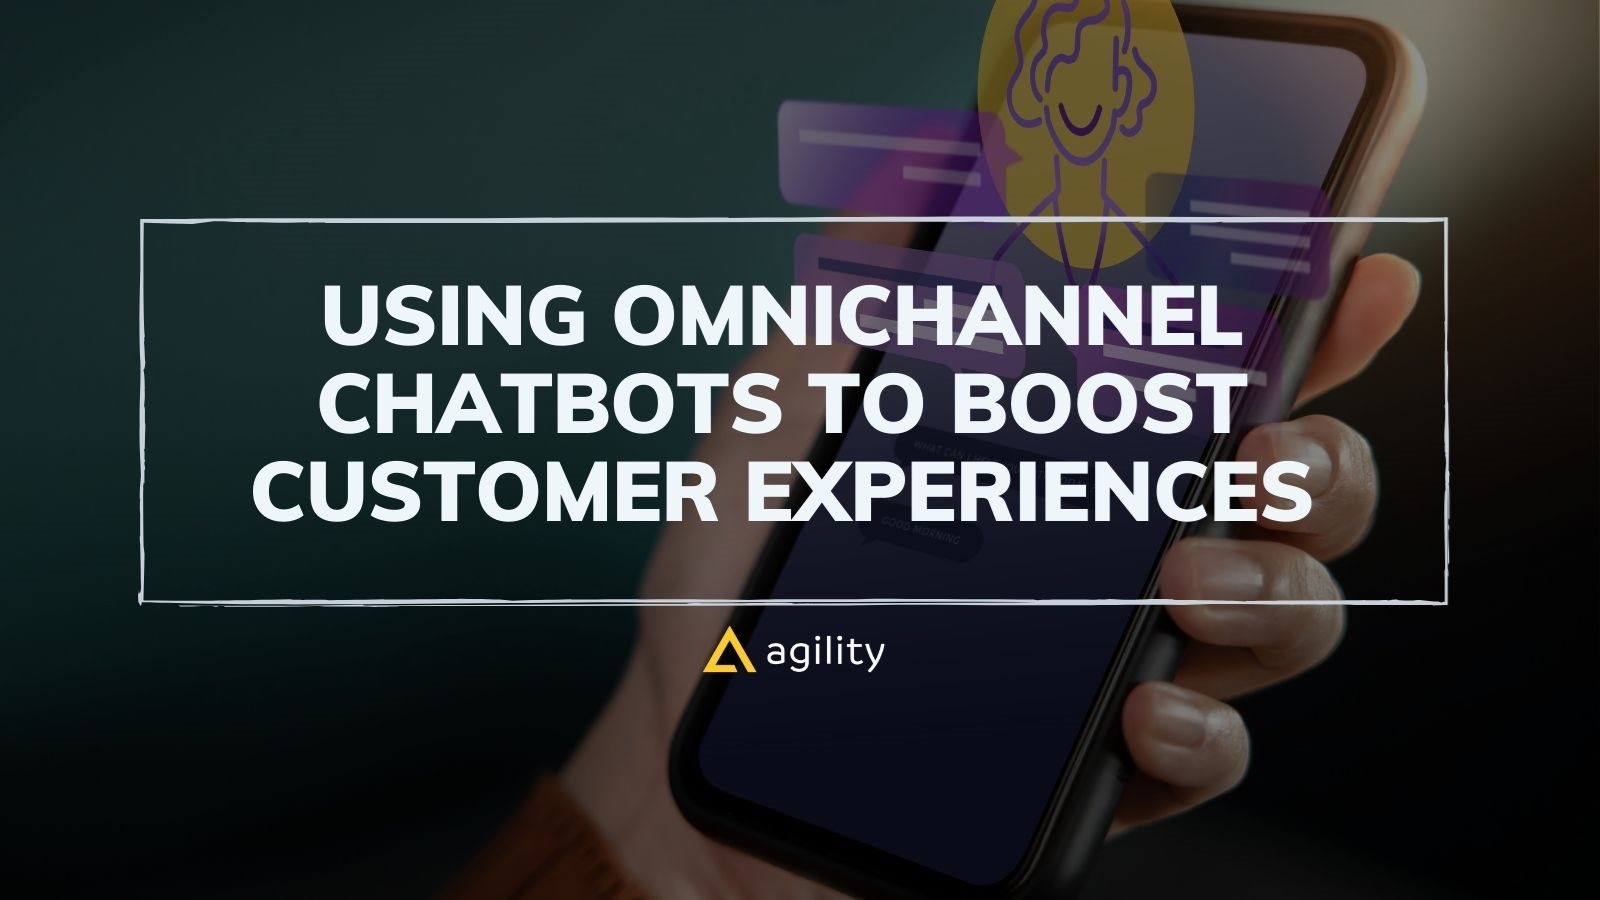 Using Omnichannel Chatbots to Boost Customer Experiences